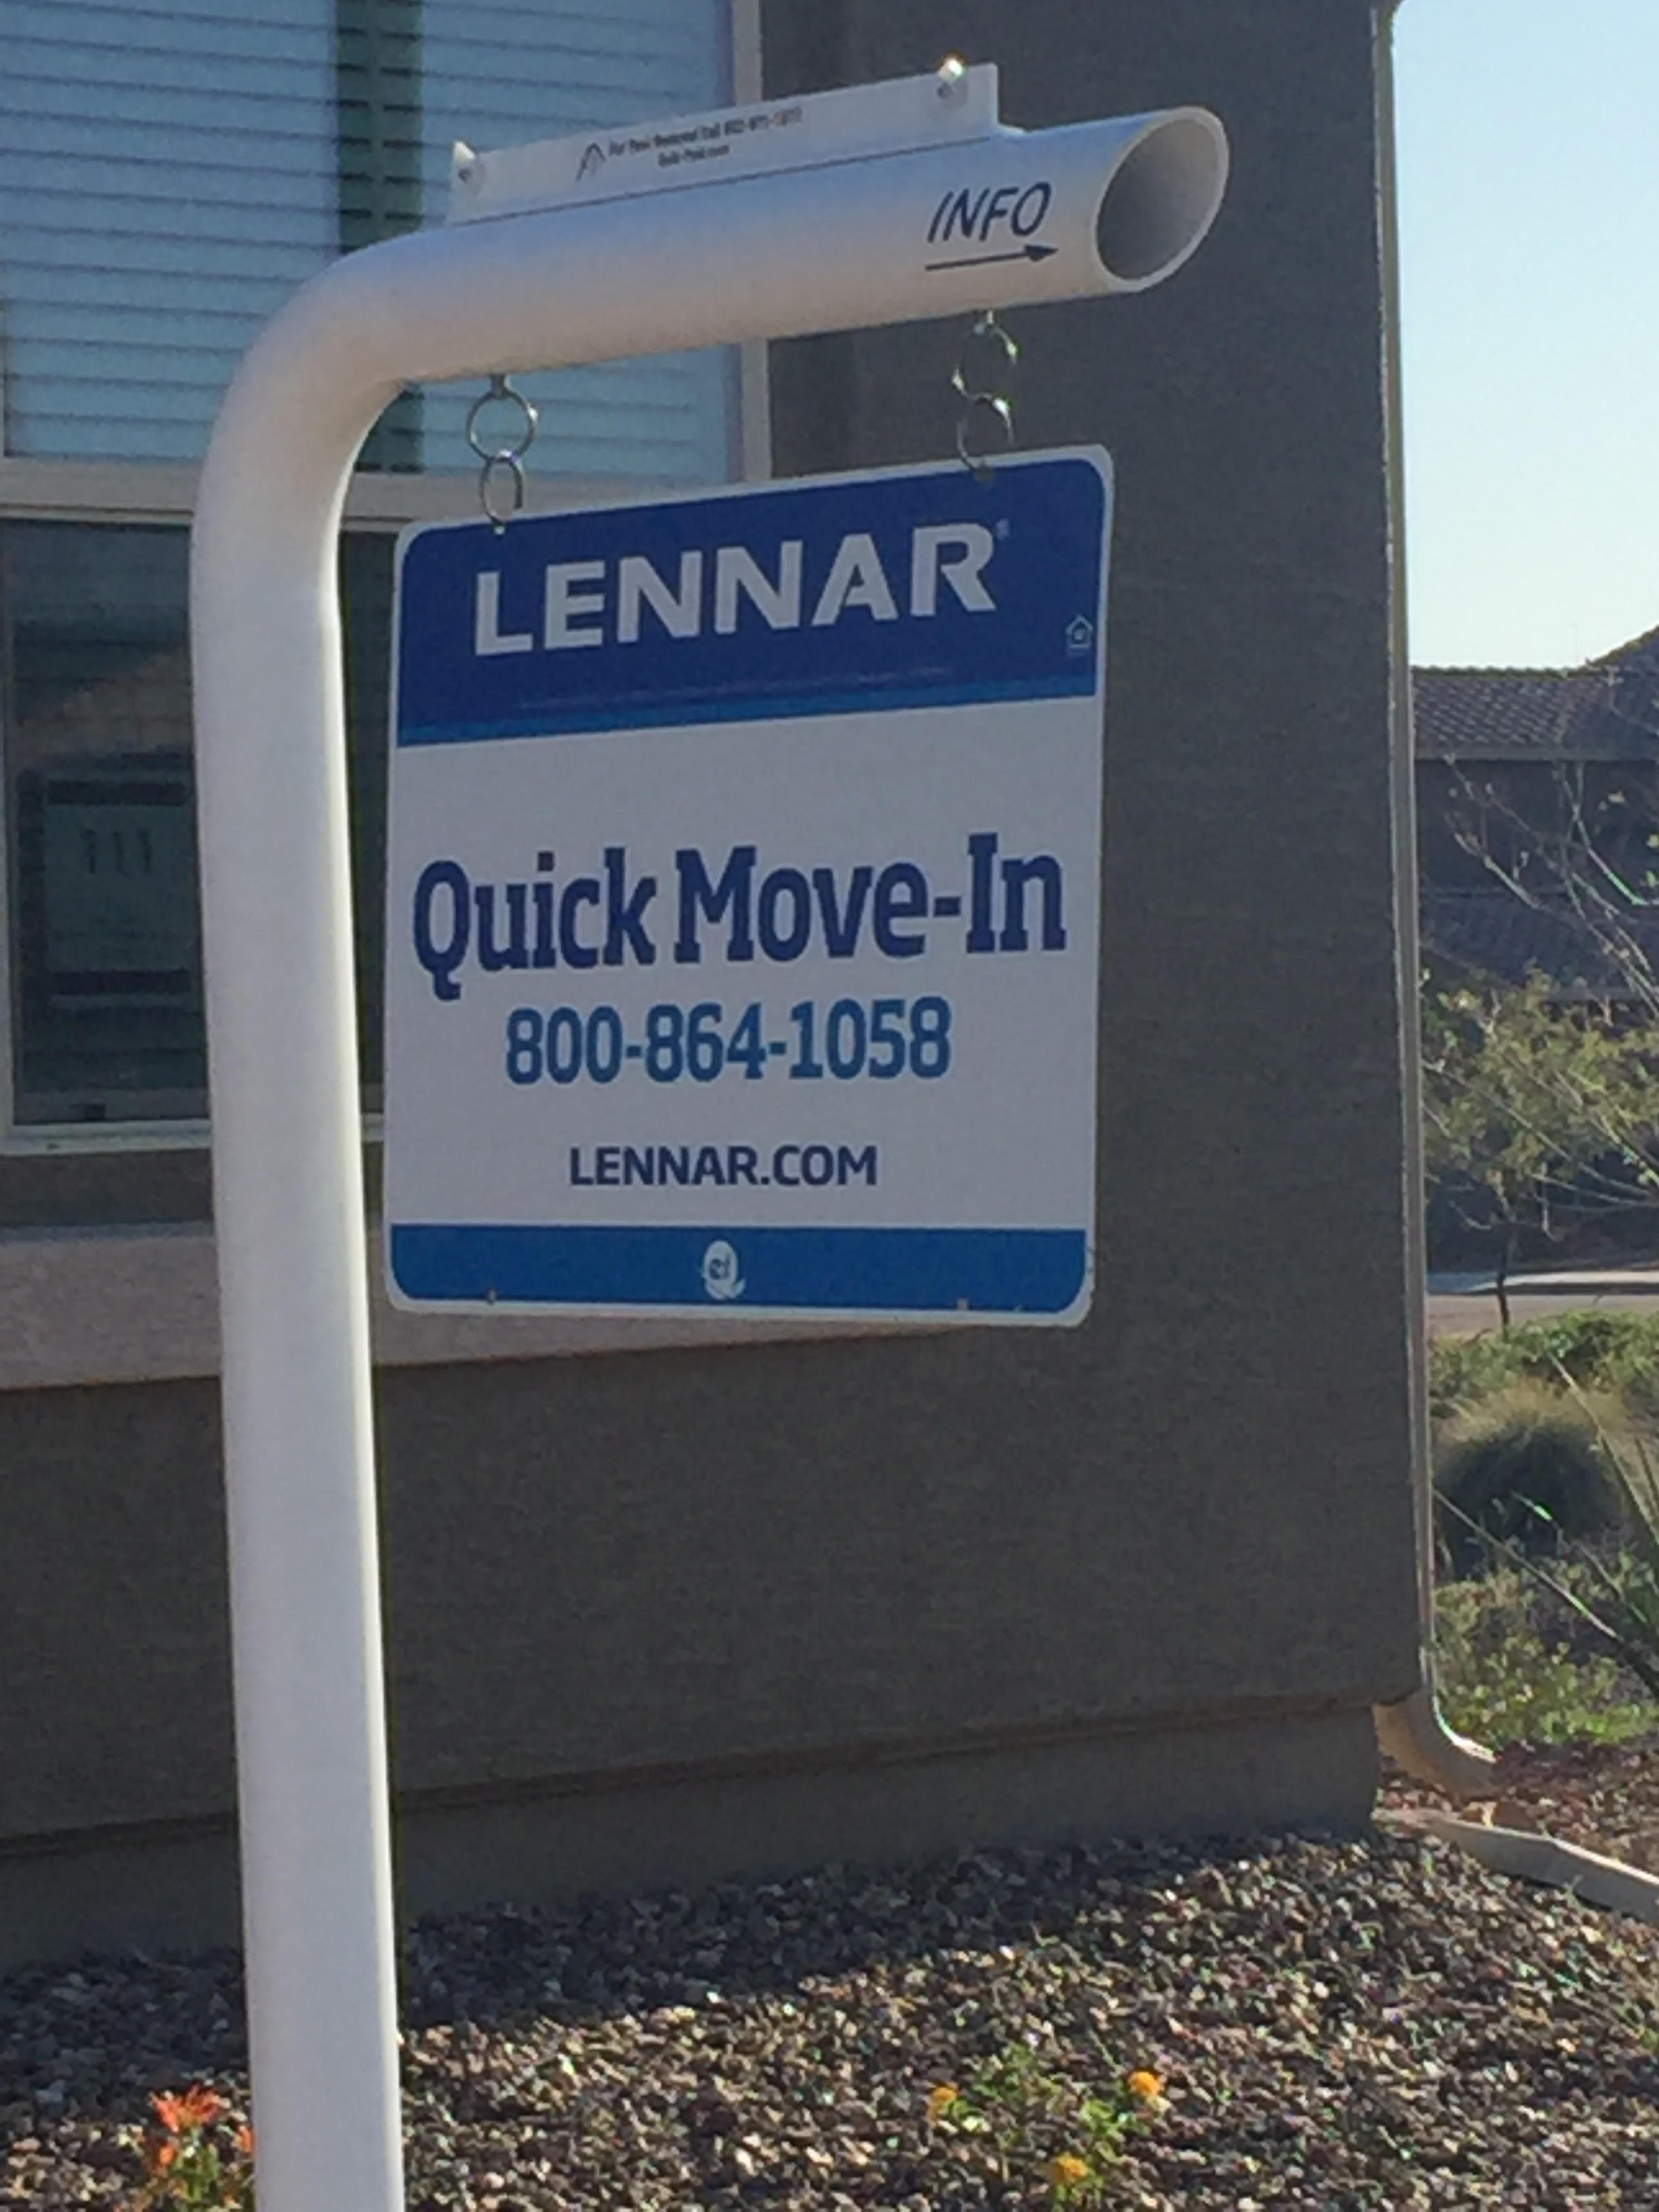 Lennar wants money so much to pay outragious salaries plus execs engased in whistleblower activities